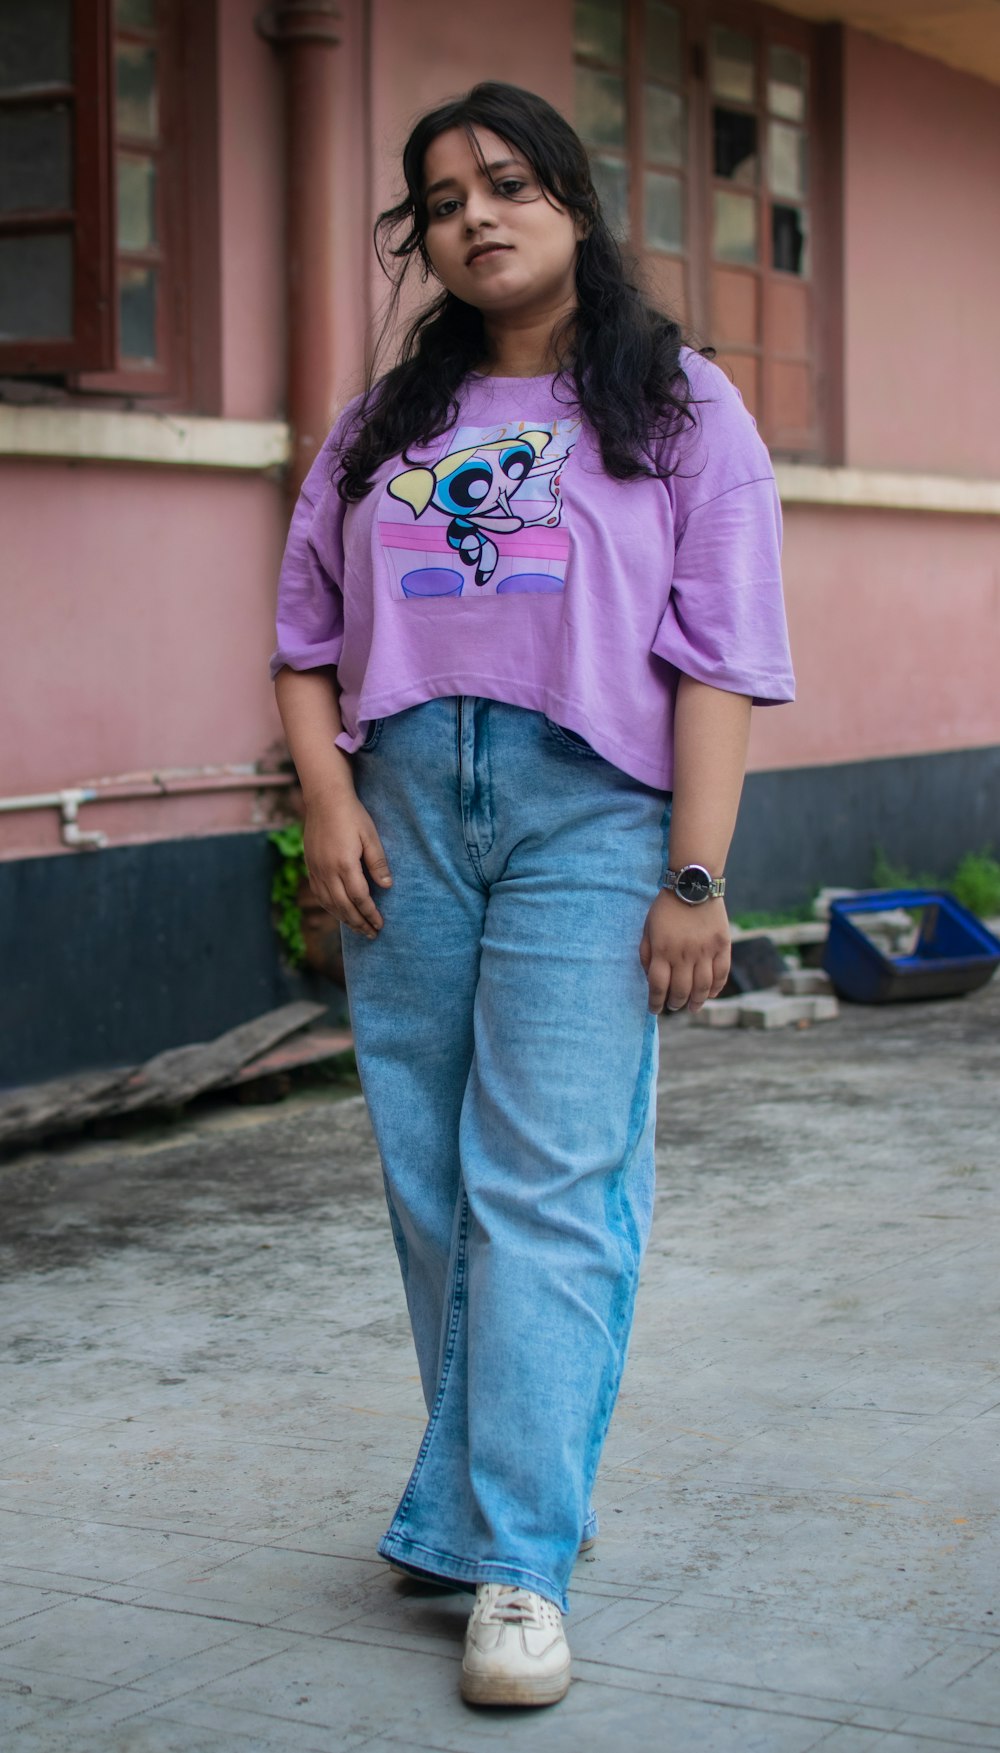 a woman wearing a purple shirt and jeans standing in front of a pink building